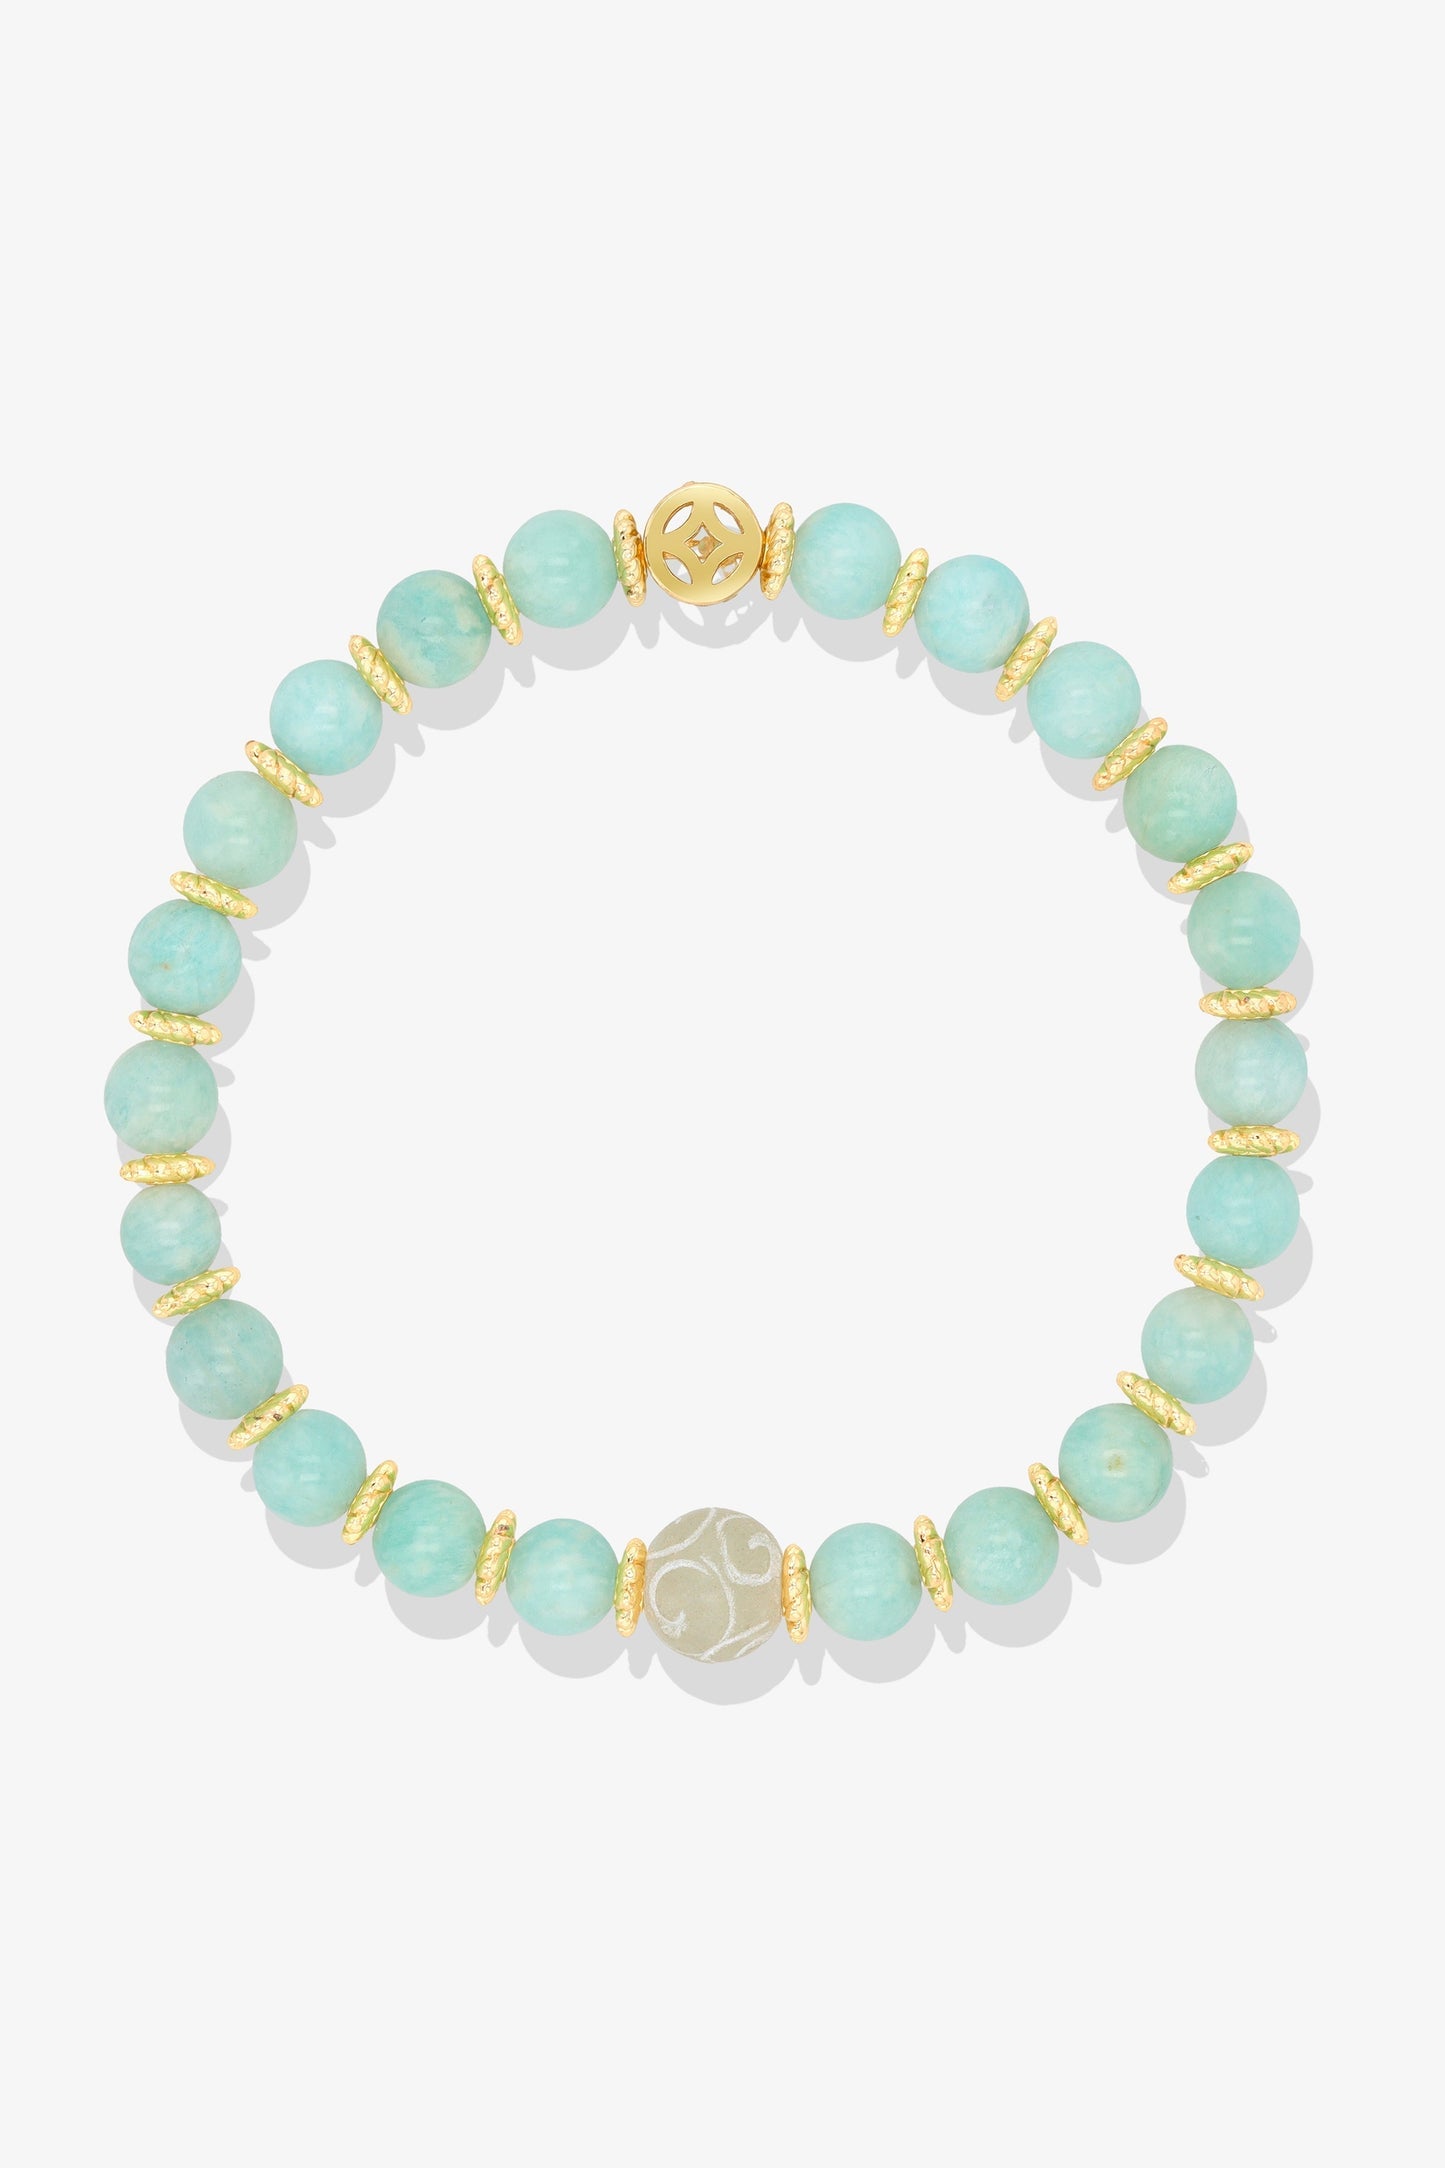 Jade with Gold Lucky Coin and White Jade charm Bracelet